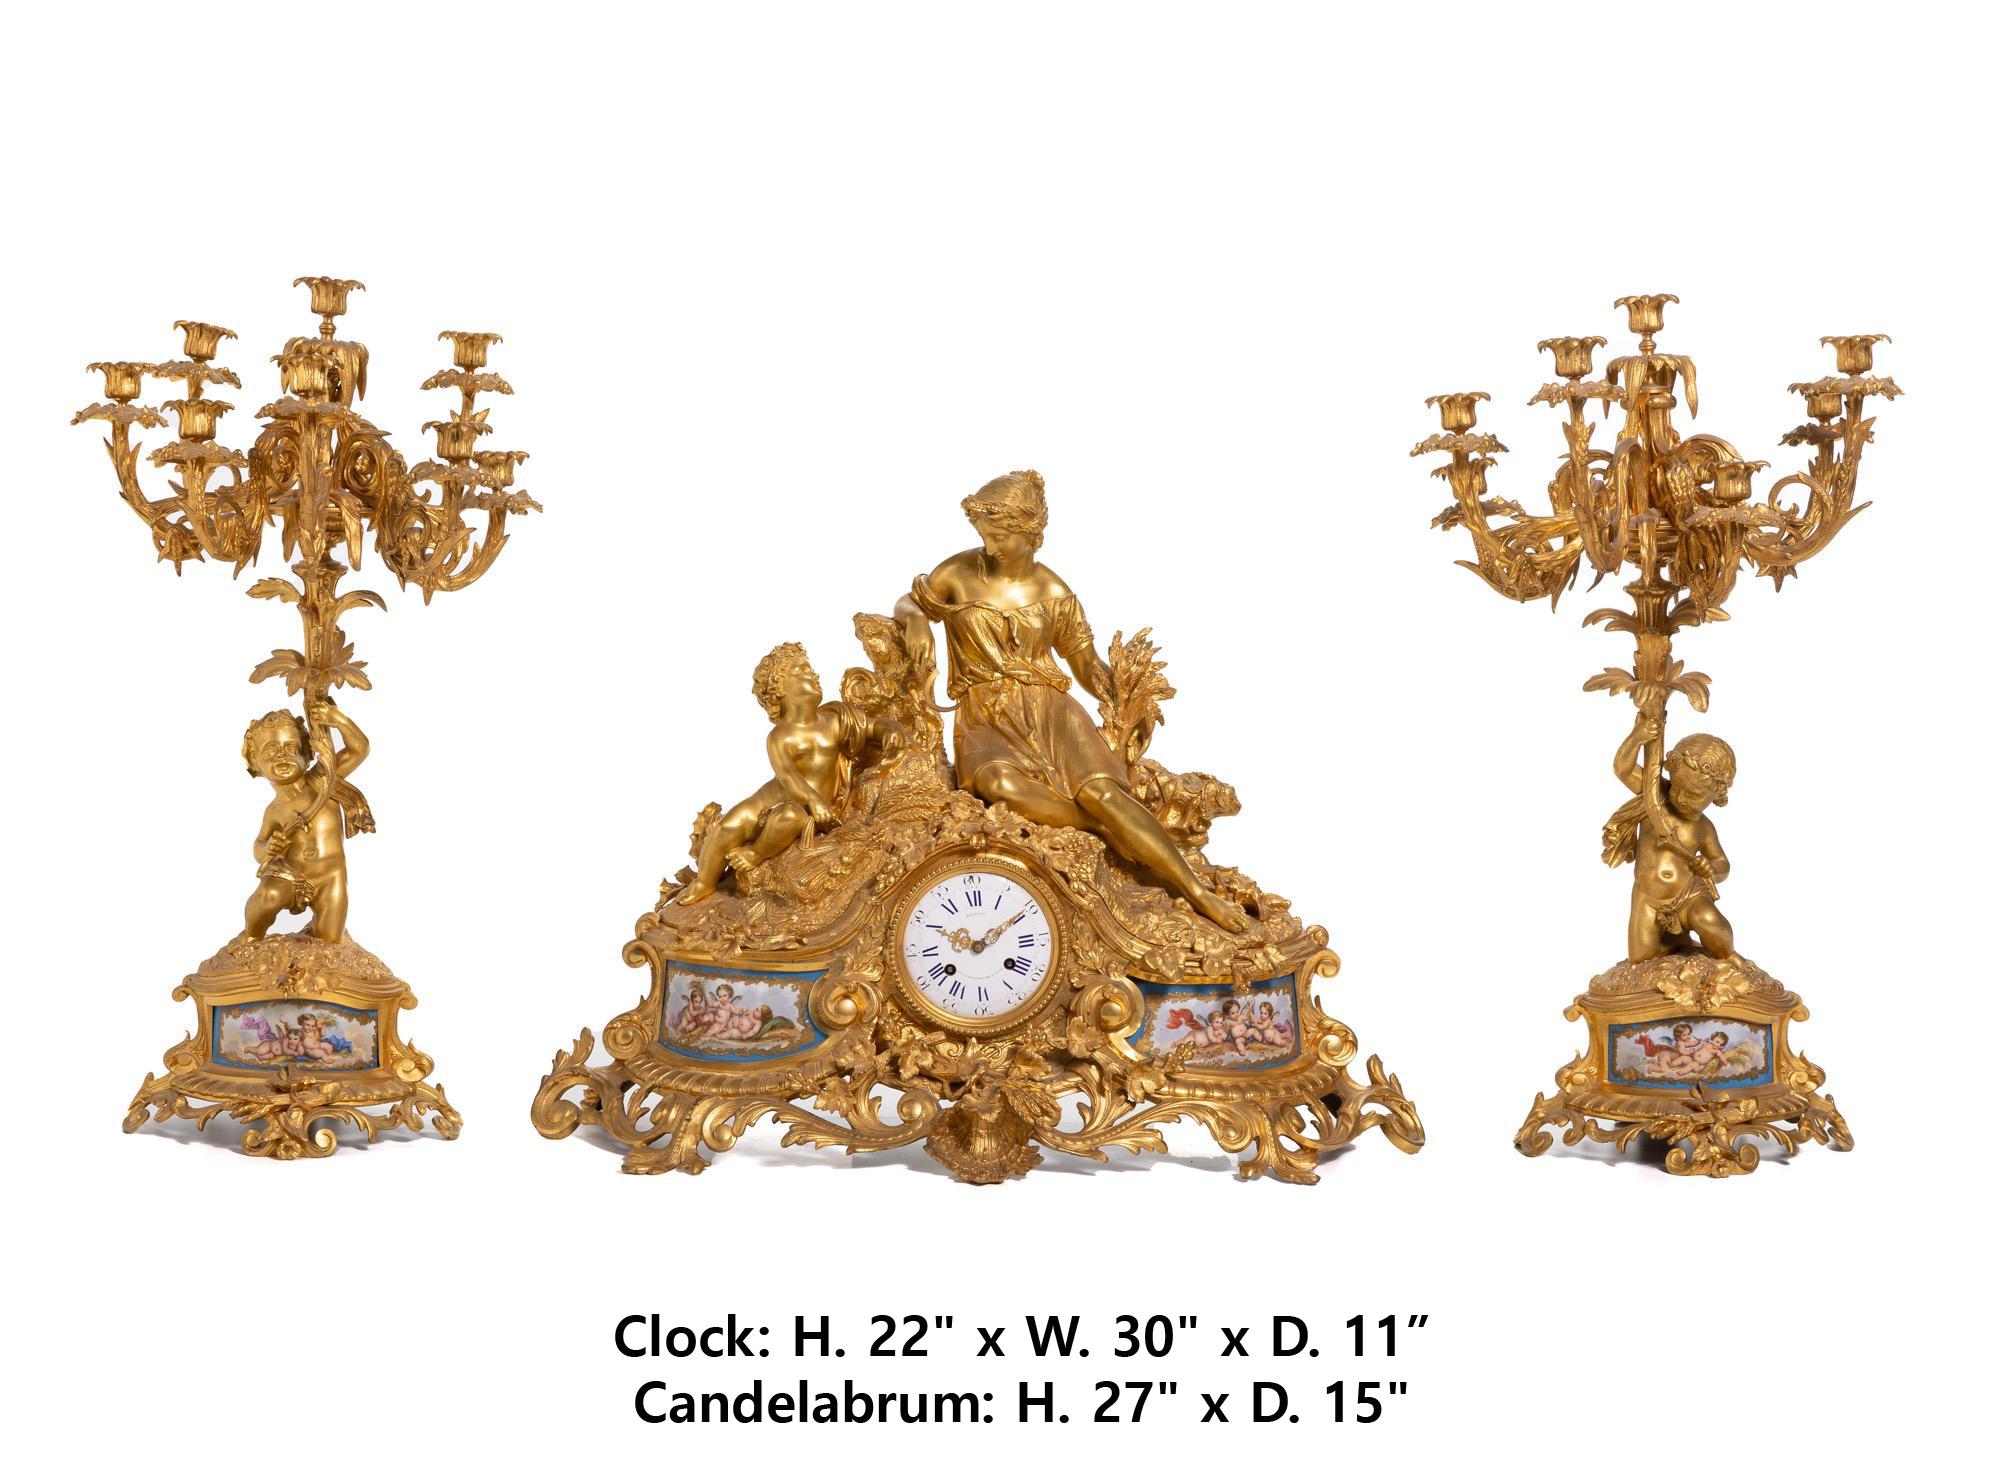 Exceptional Late 19th Century French Louis XV Style ormolu and Sevres style porcelain 3 piece  clock garniture set
Dial marked: Richond / Boult. / Montmartre 21 Paris; Movement marked: Roblin / A Paris / 12686 
The clock with an enameled metal dial,